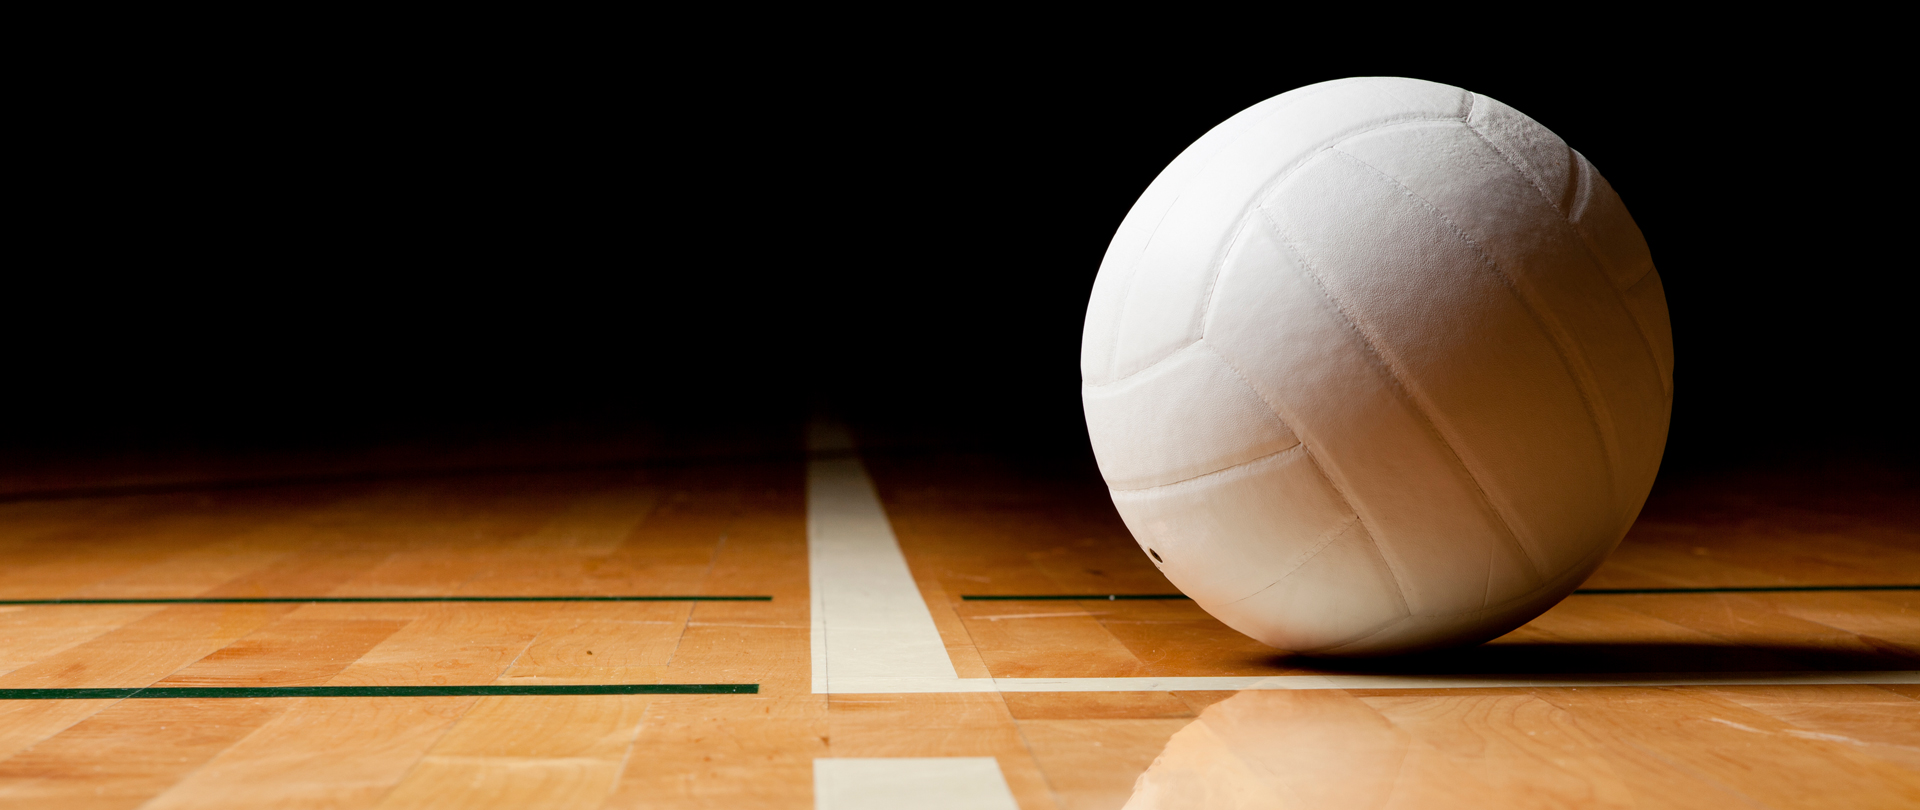 Adult Coed Volleyball
September - October 2022
